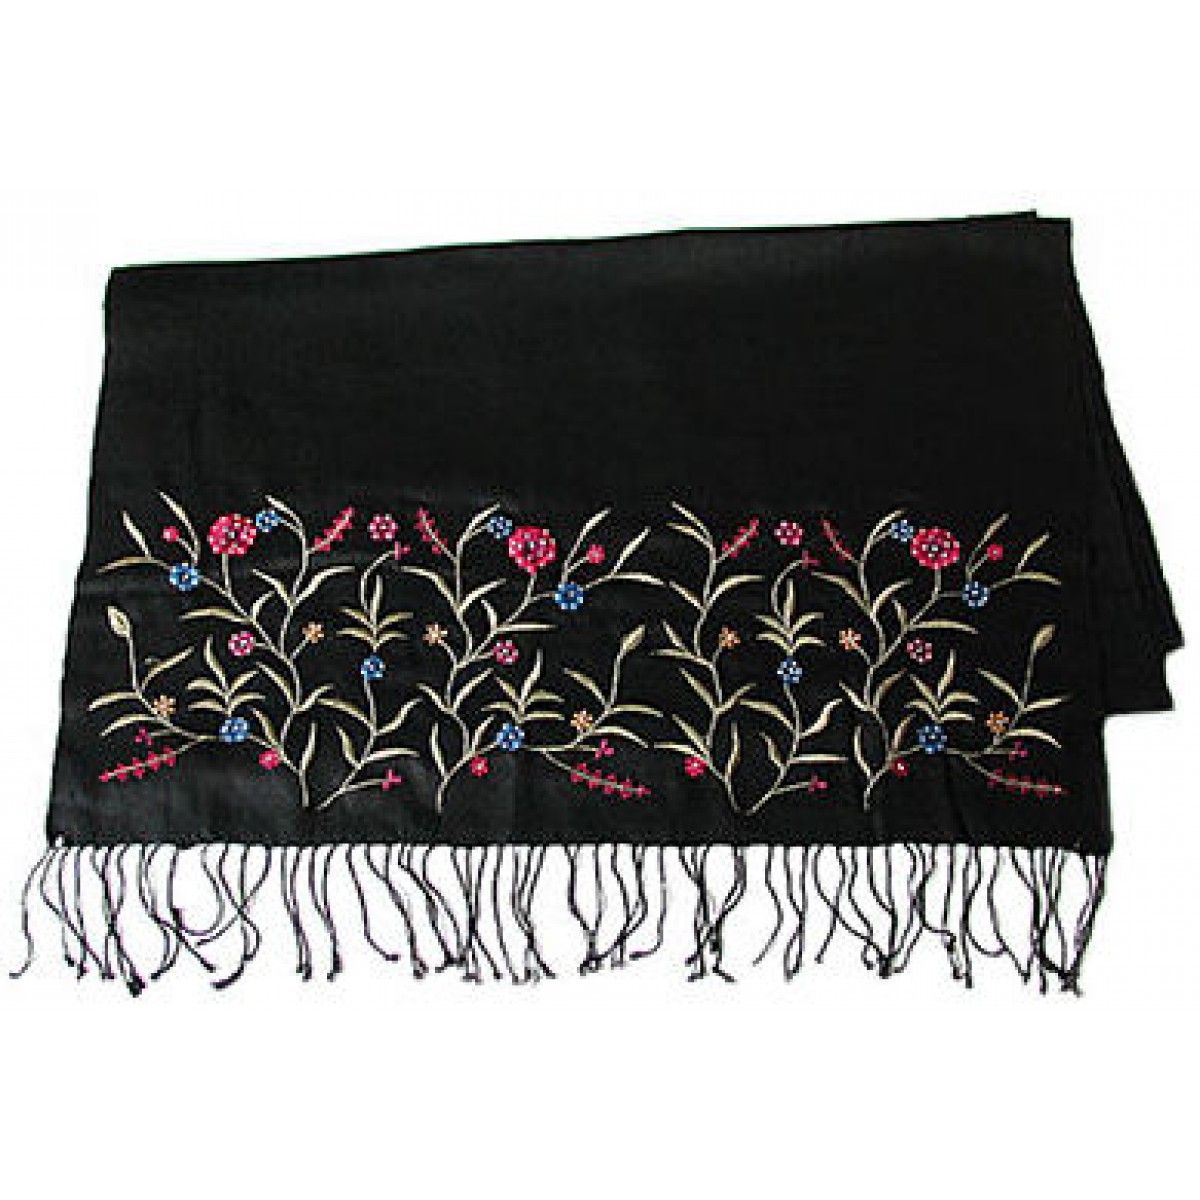 Pashmina Shawl With Hand Embroidery